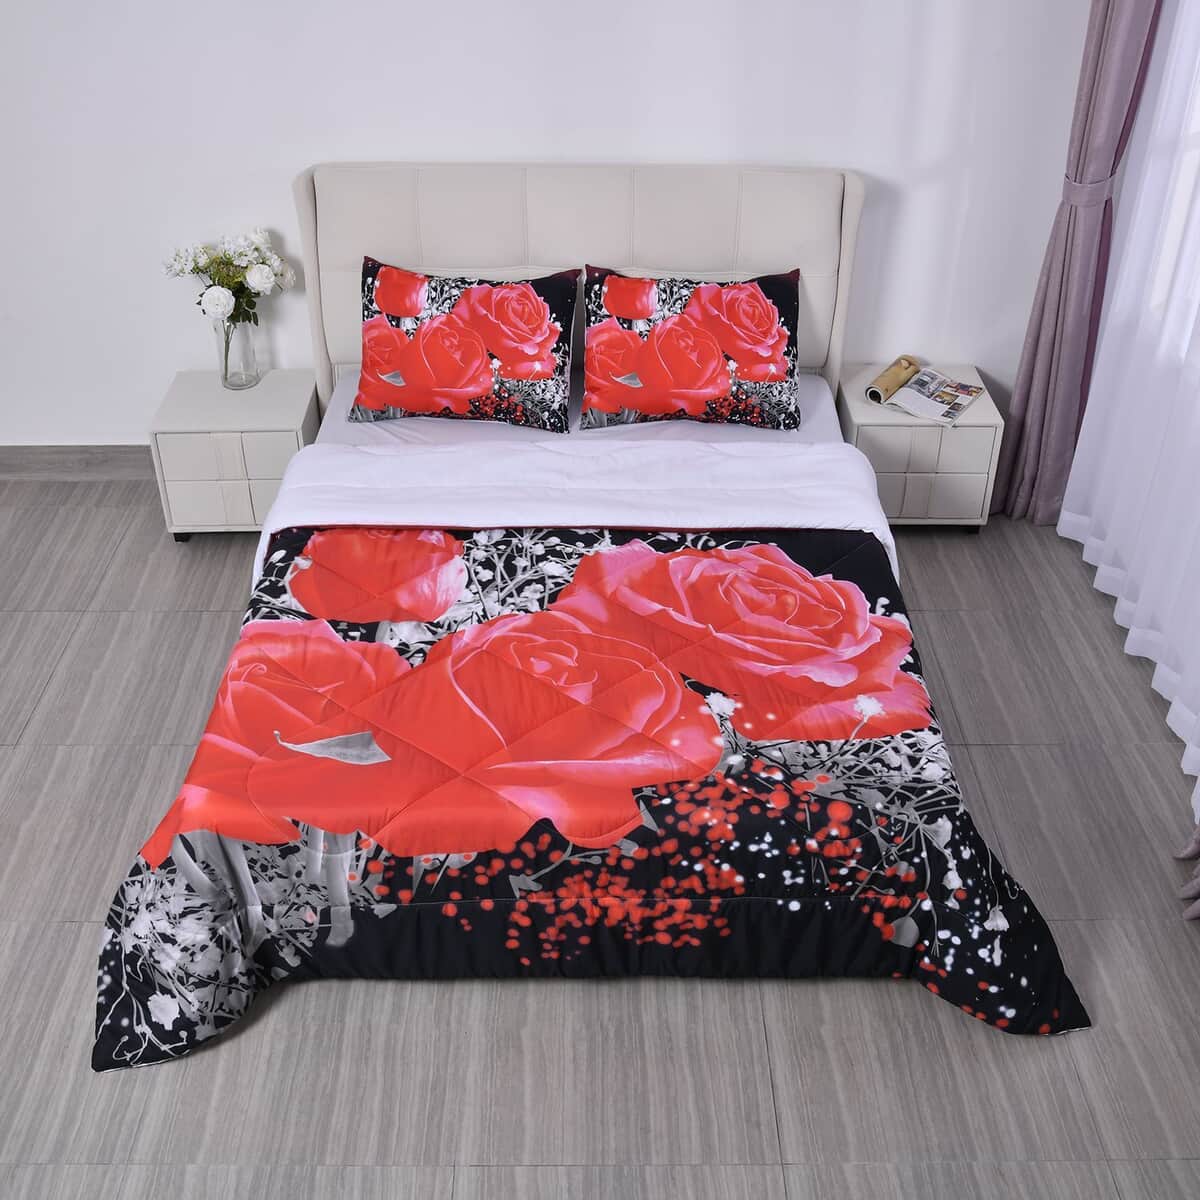 Homesmart Red Floral 3D Digital Print Pattern Microfiber Comforter and Pillow Cover - Queen, Best Comforter Sets, Bed Comforters, Comforter Set for Bedroom image number 1